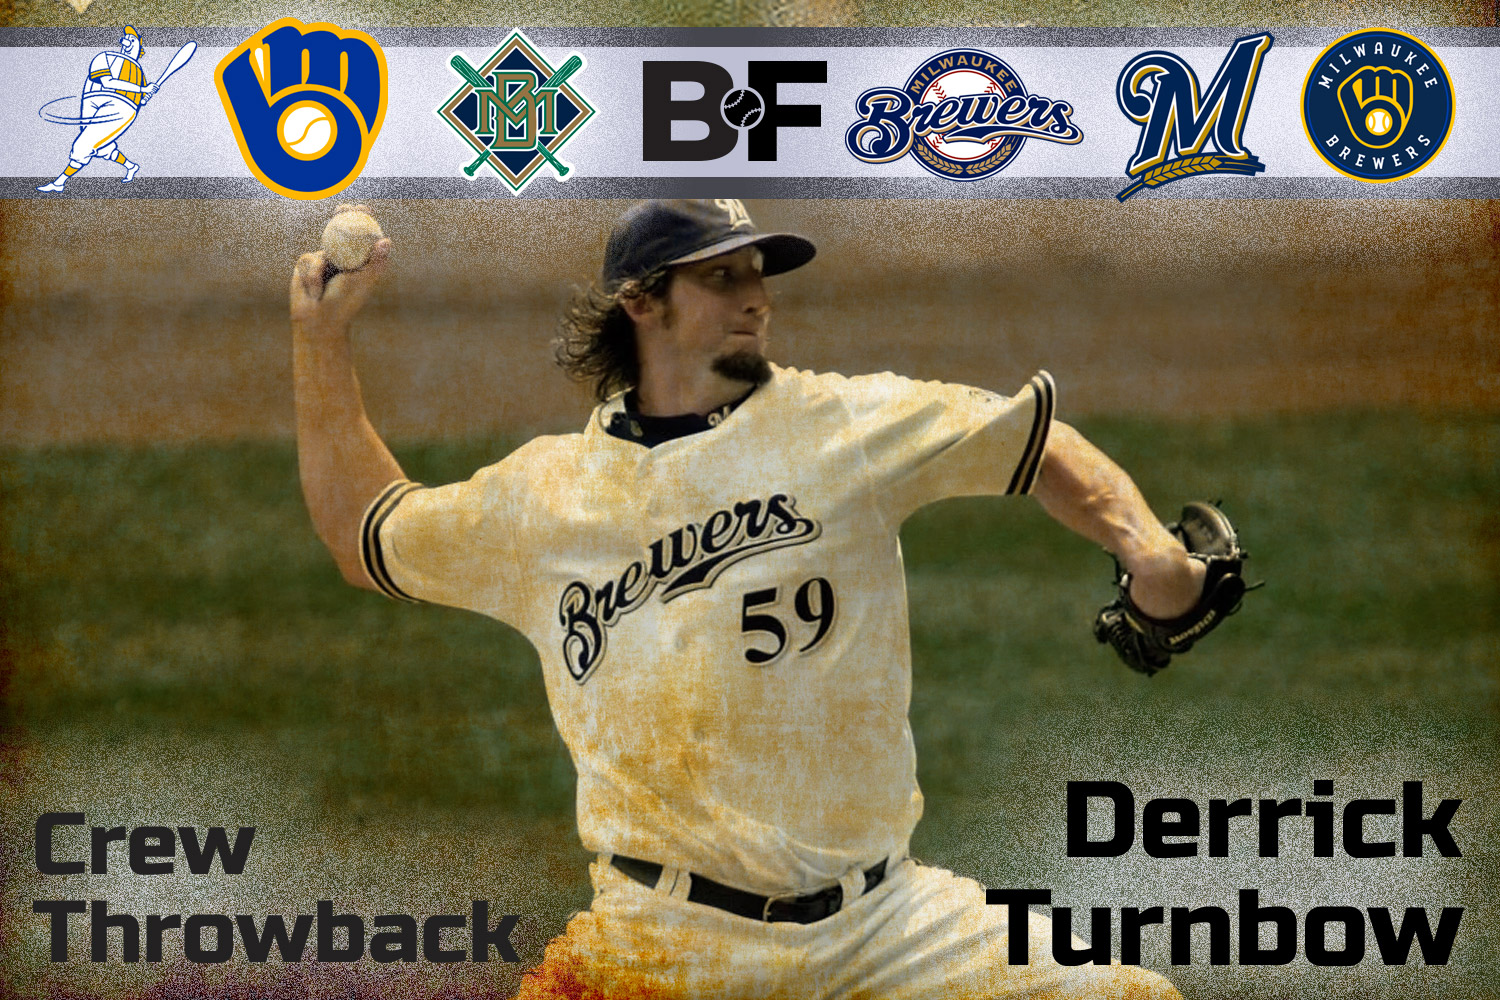 ThrowbackThursday #Brewers Wall of Honor edition continues with